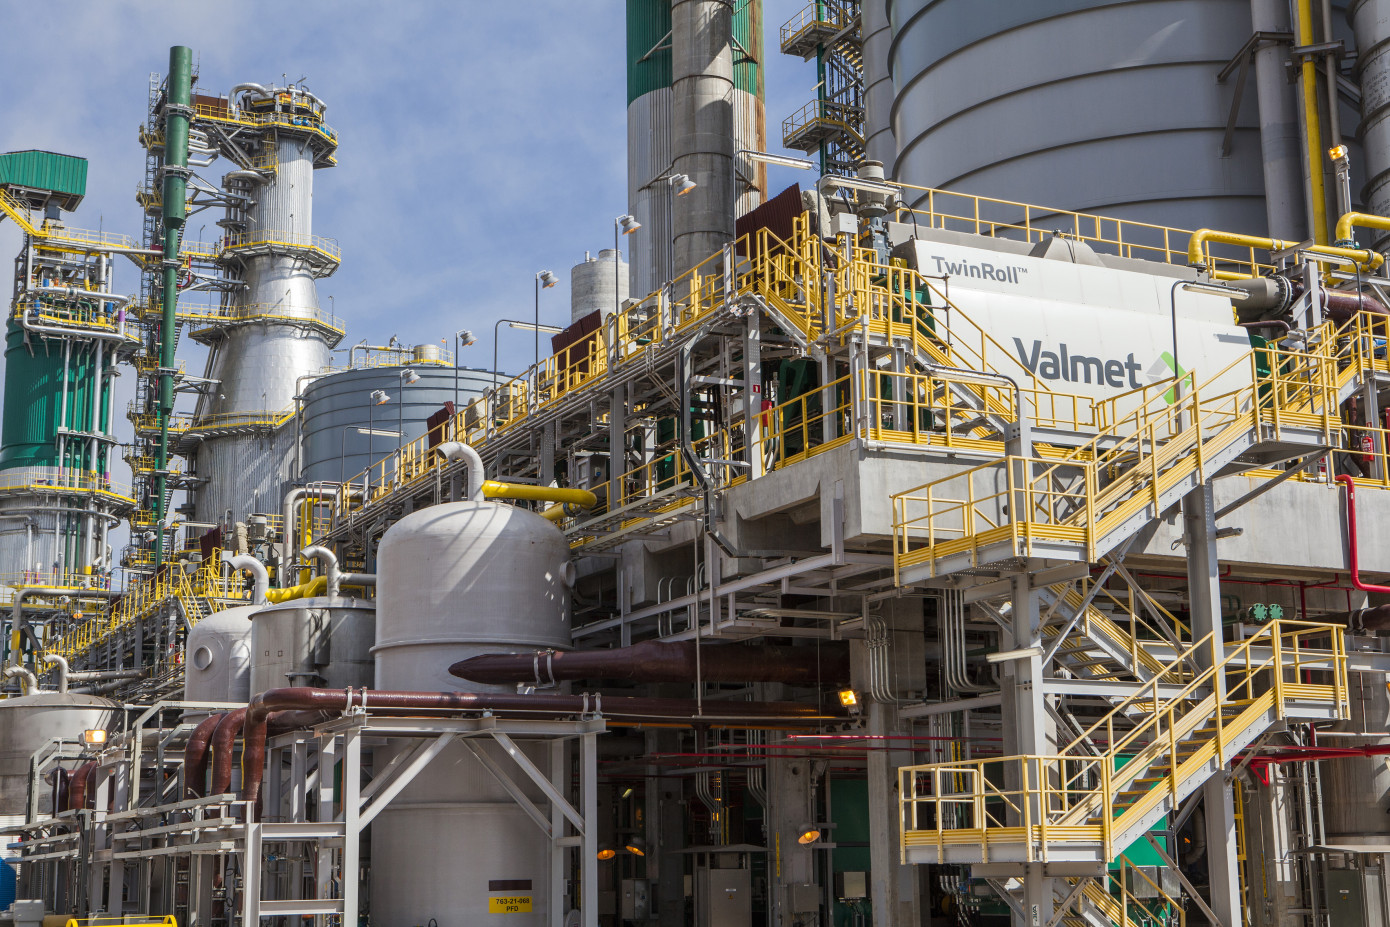 Valmet introduces Mill-Wide Optimization for steering pulp and paper mill operations towards shared goals